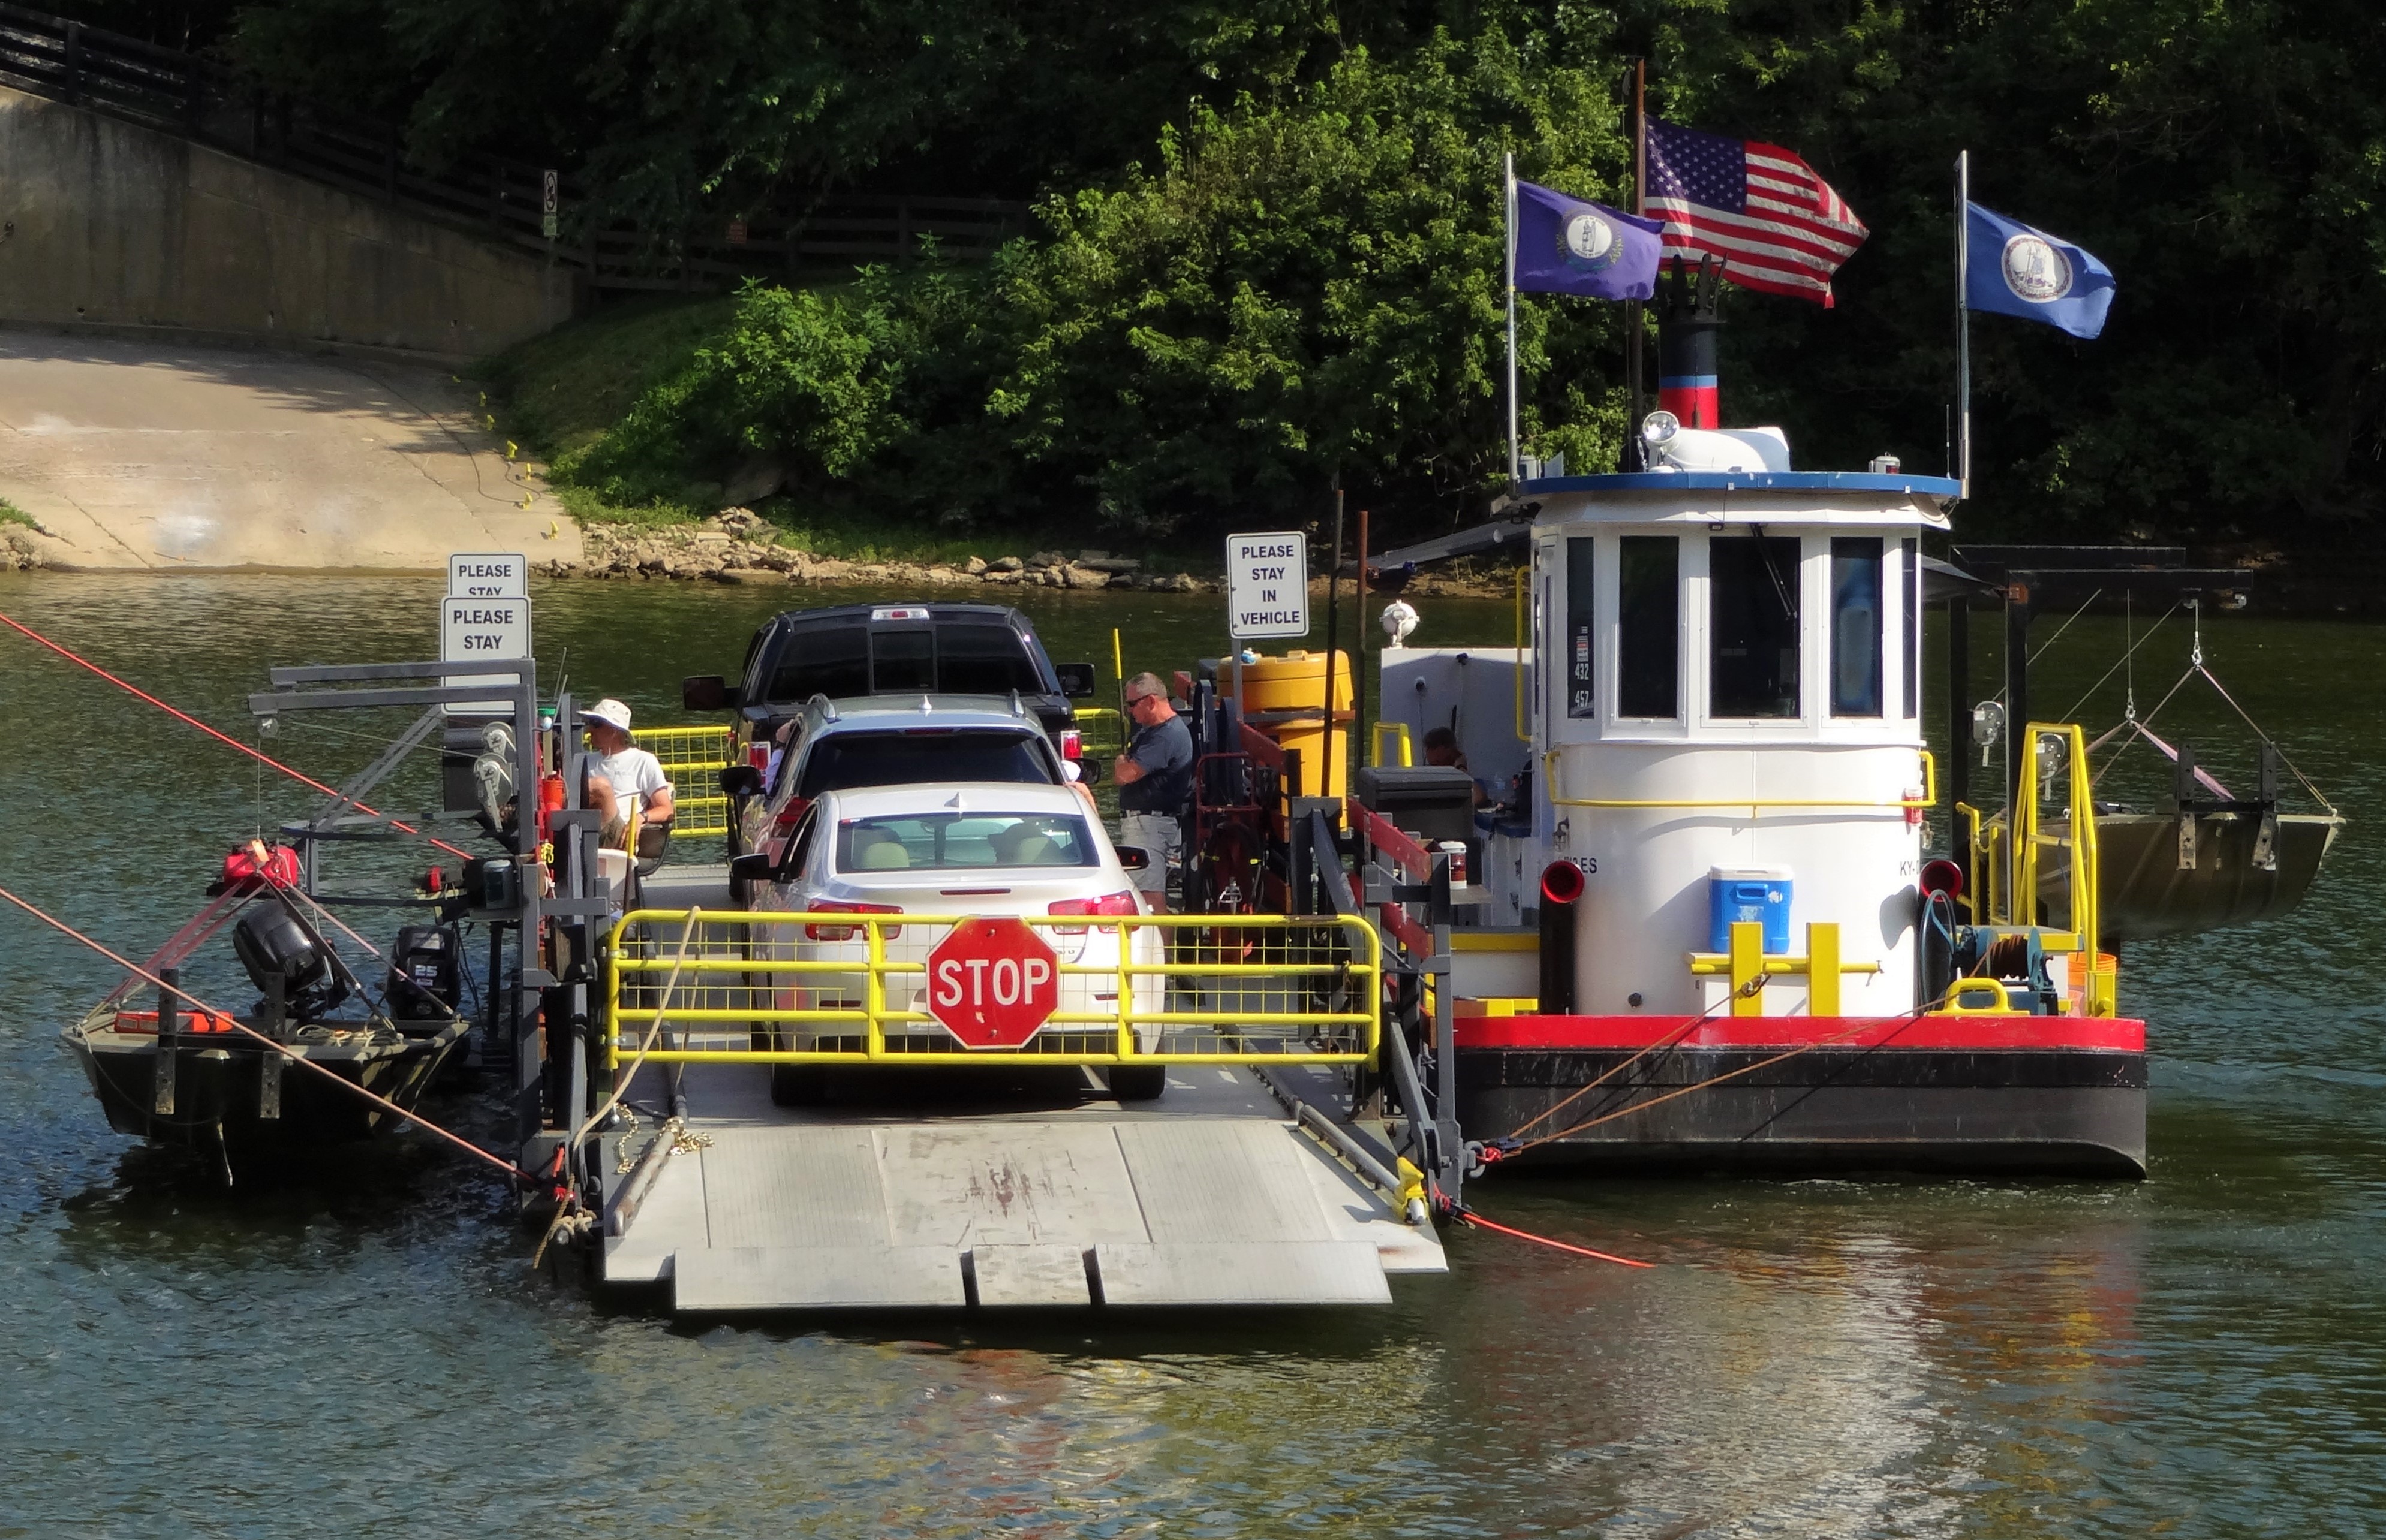 Valley View Ferryboat ferrying vehicles across the Kentucky River